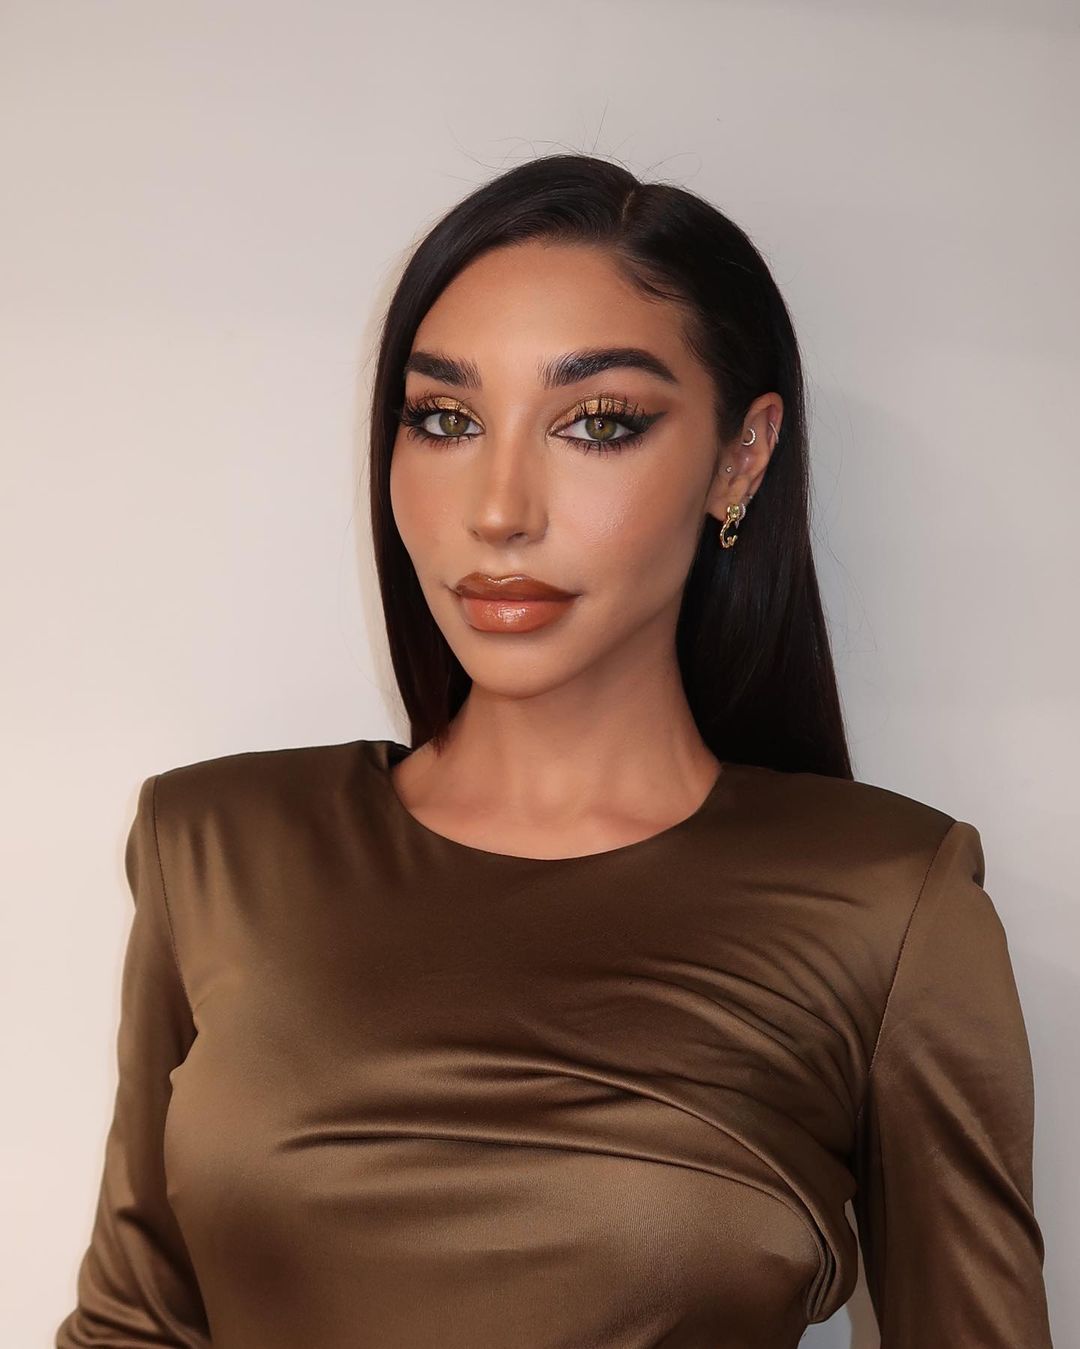 Chantel Jeffries West Age, Height, Wife, Family – Biographyprofiles